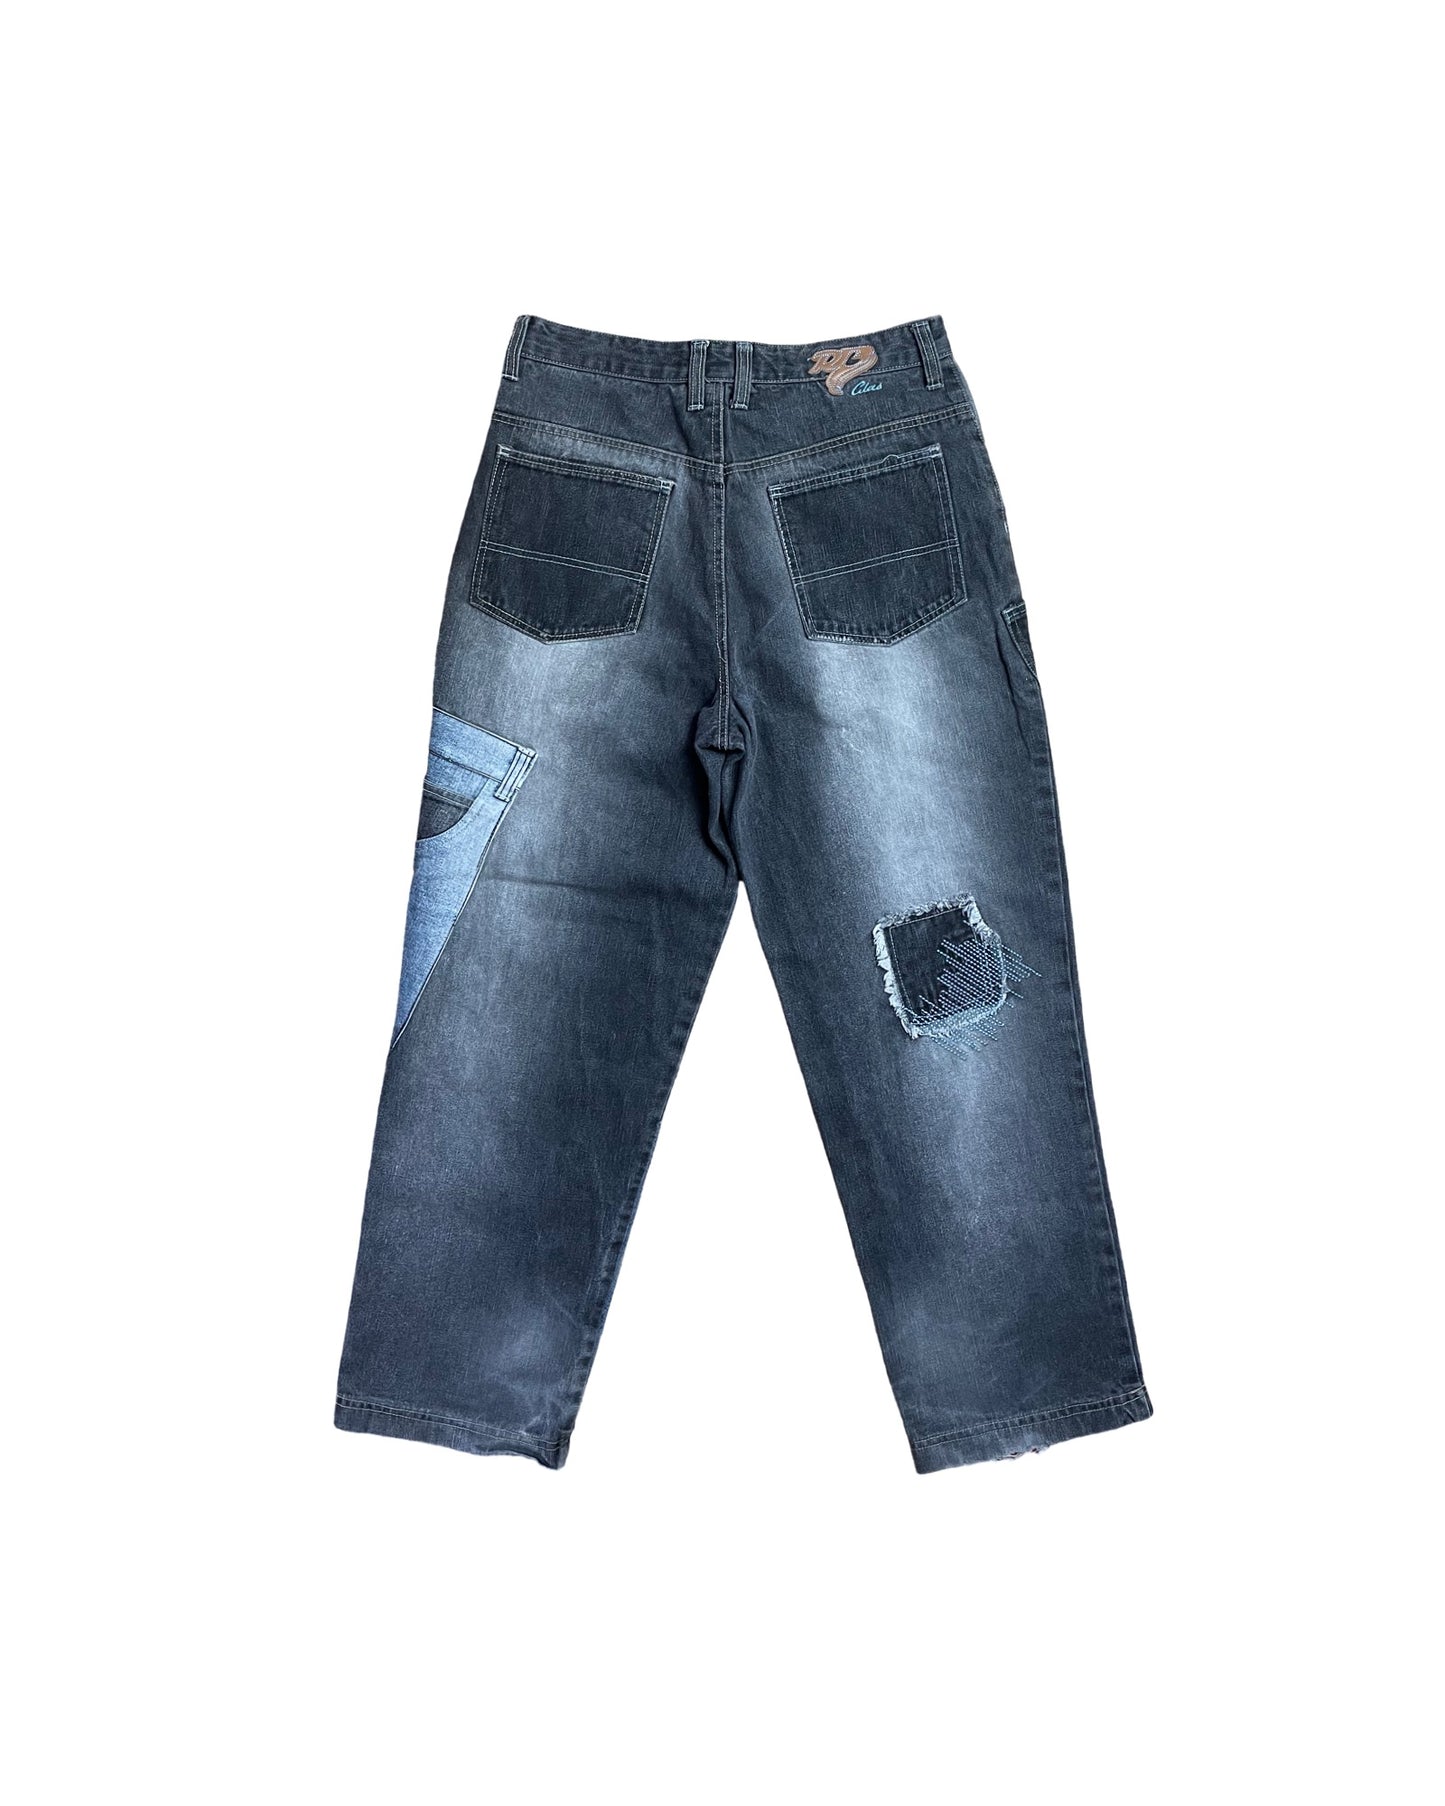 Raw Blue Patchwork Jeans